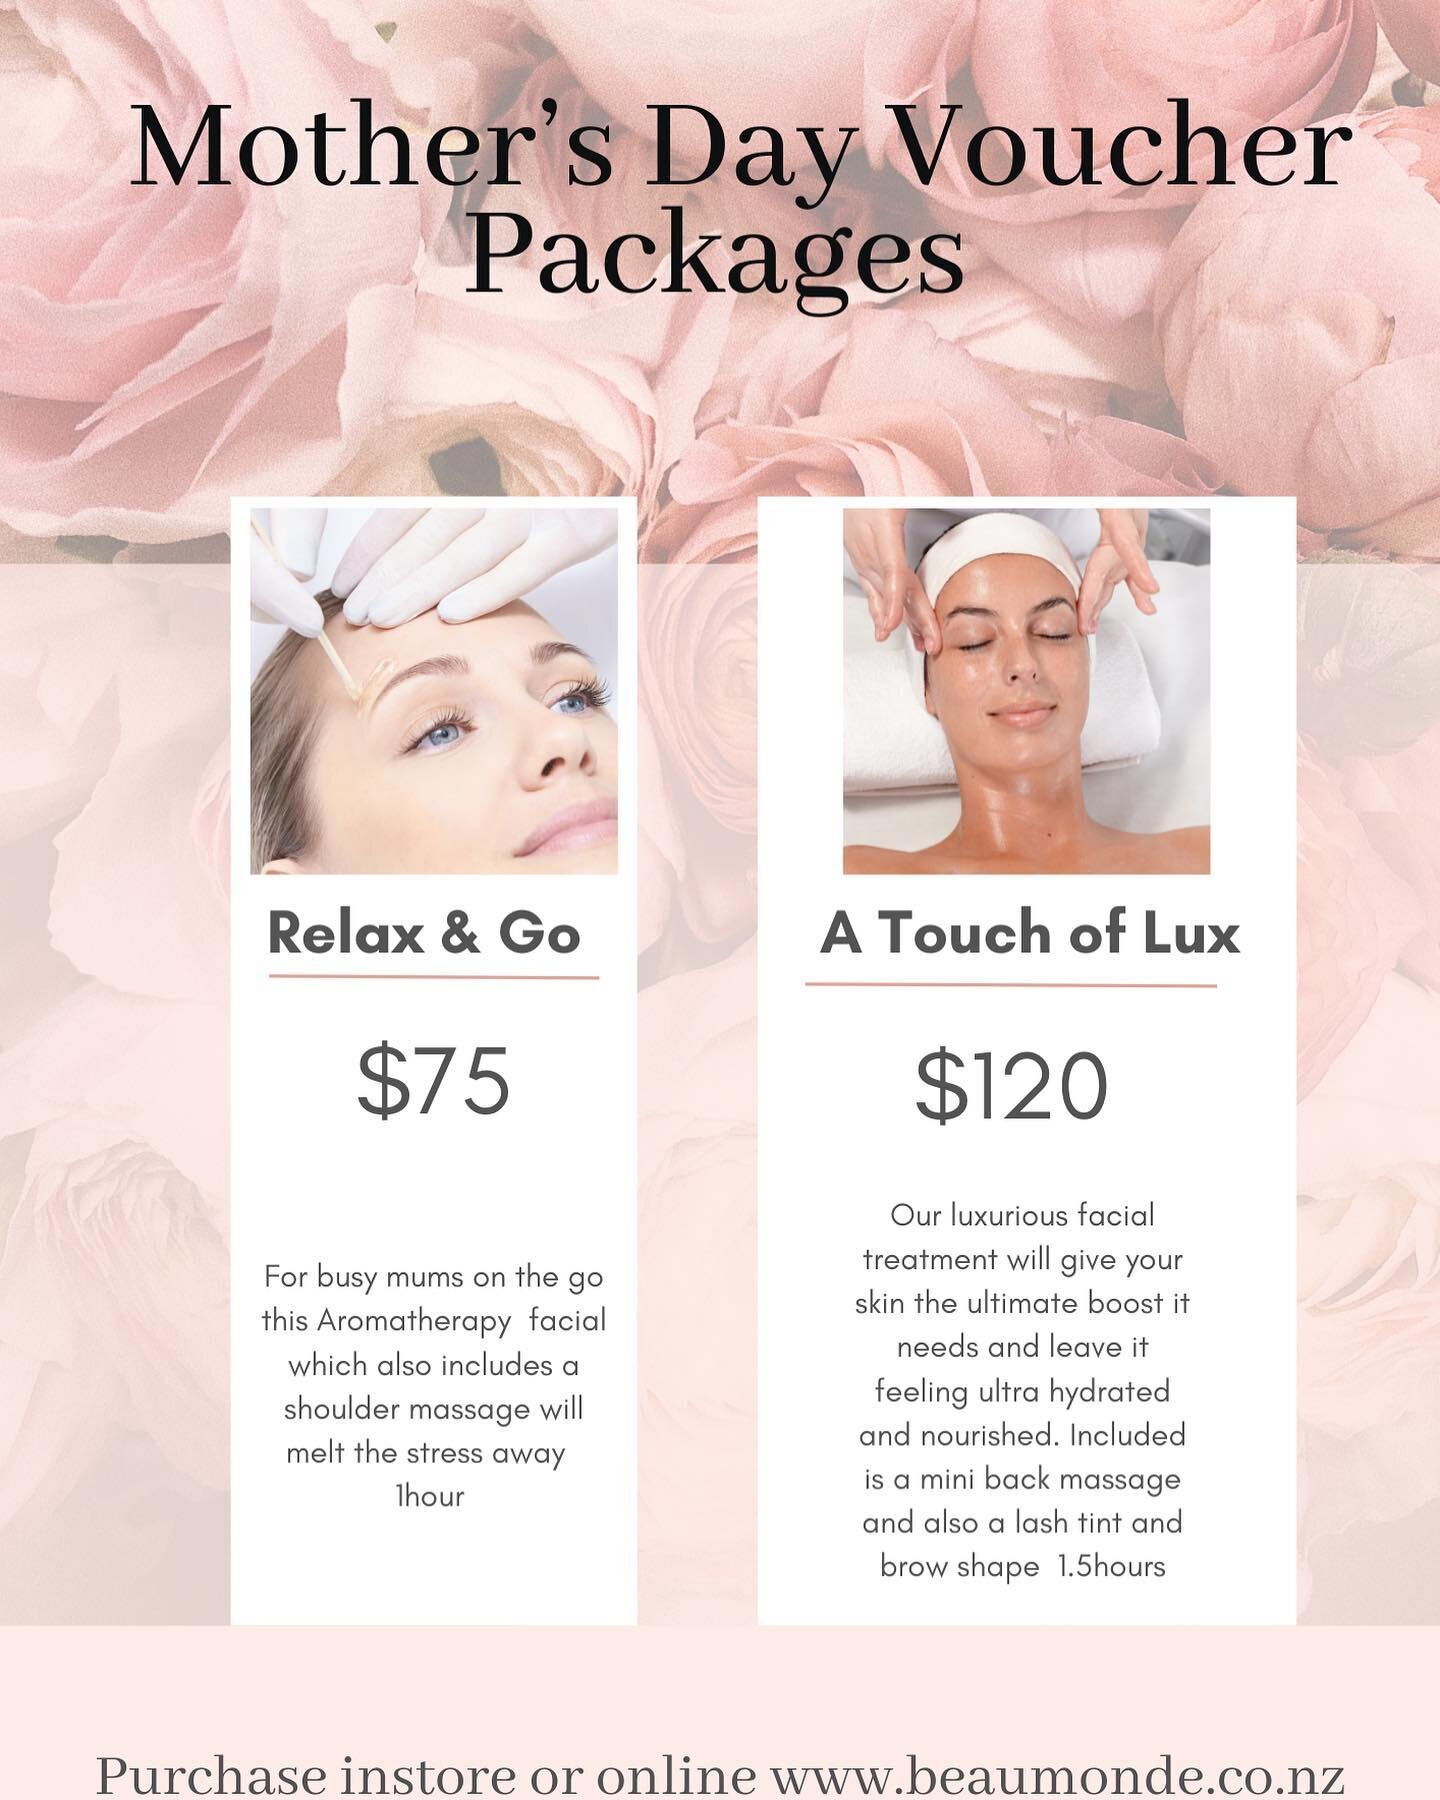 Mother&rsquo;s Day isn&rsquo;t far away ✨✨✨

Spoil mum or that special mother figure in your life with one of our gorgeous facial pamper packages//

A gift of pure relaxation &amp; Indulgence 💆&zwj;♀️

Vouchers available online or instore 
https://w